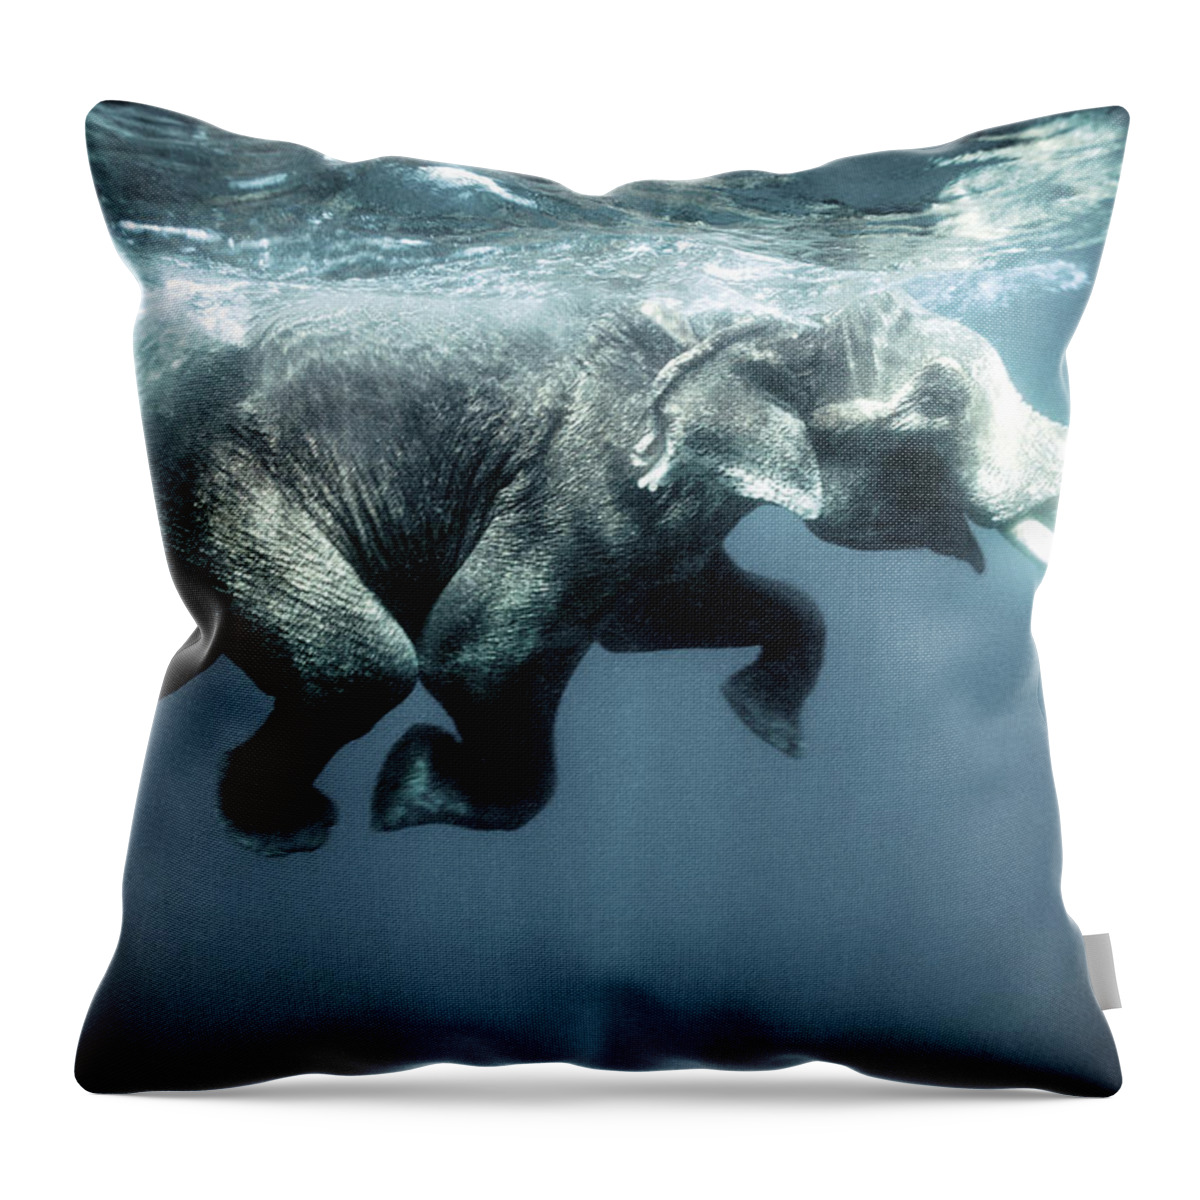 Swimming Throw Pillow featuring the photograph Swimming elephant by Olivier Blaise